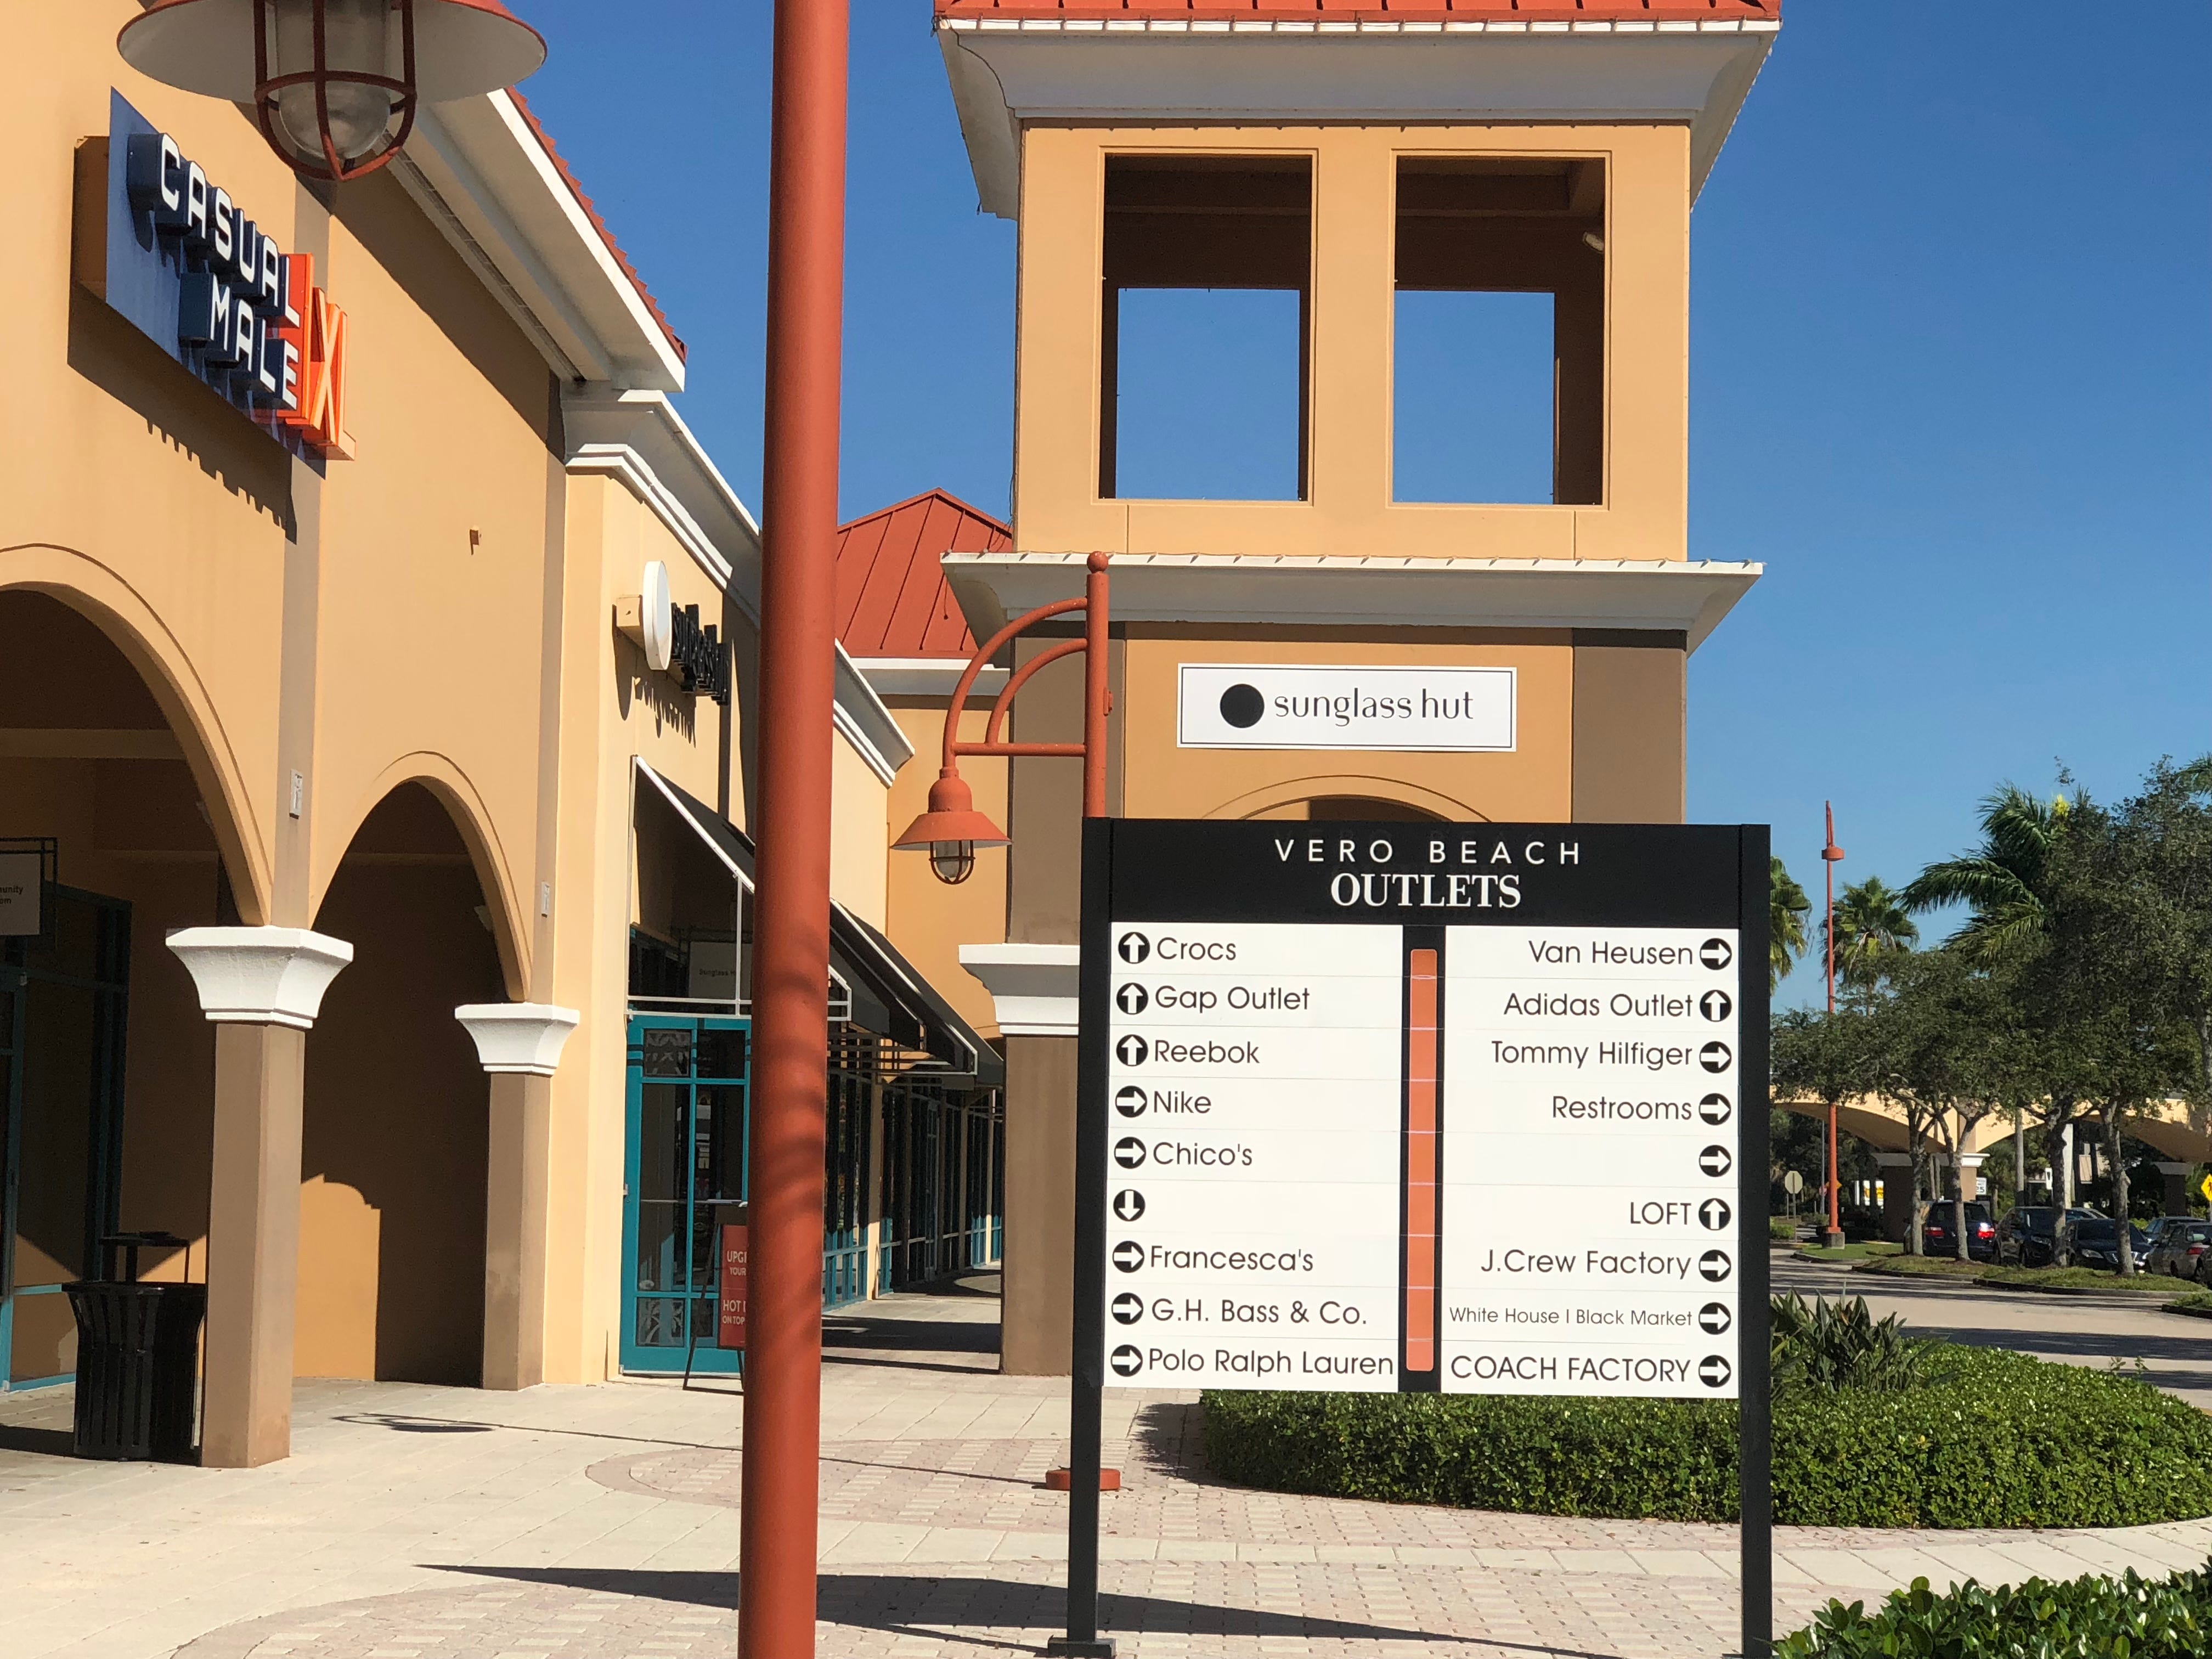 restaurants coming to Vero Beach Outlets